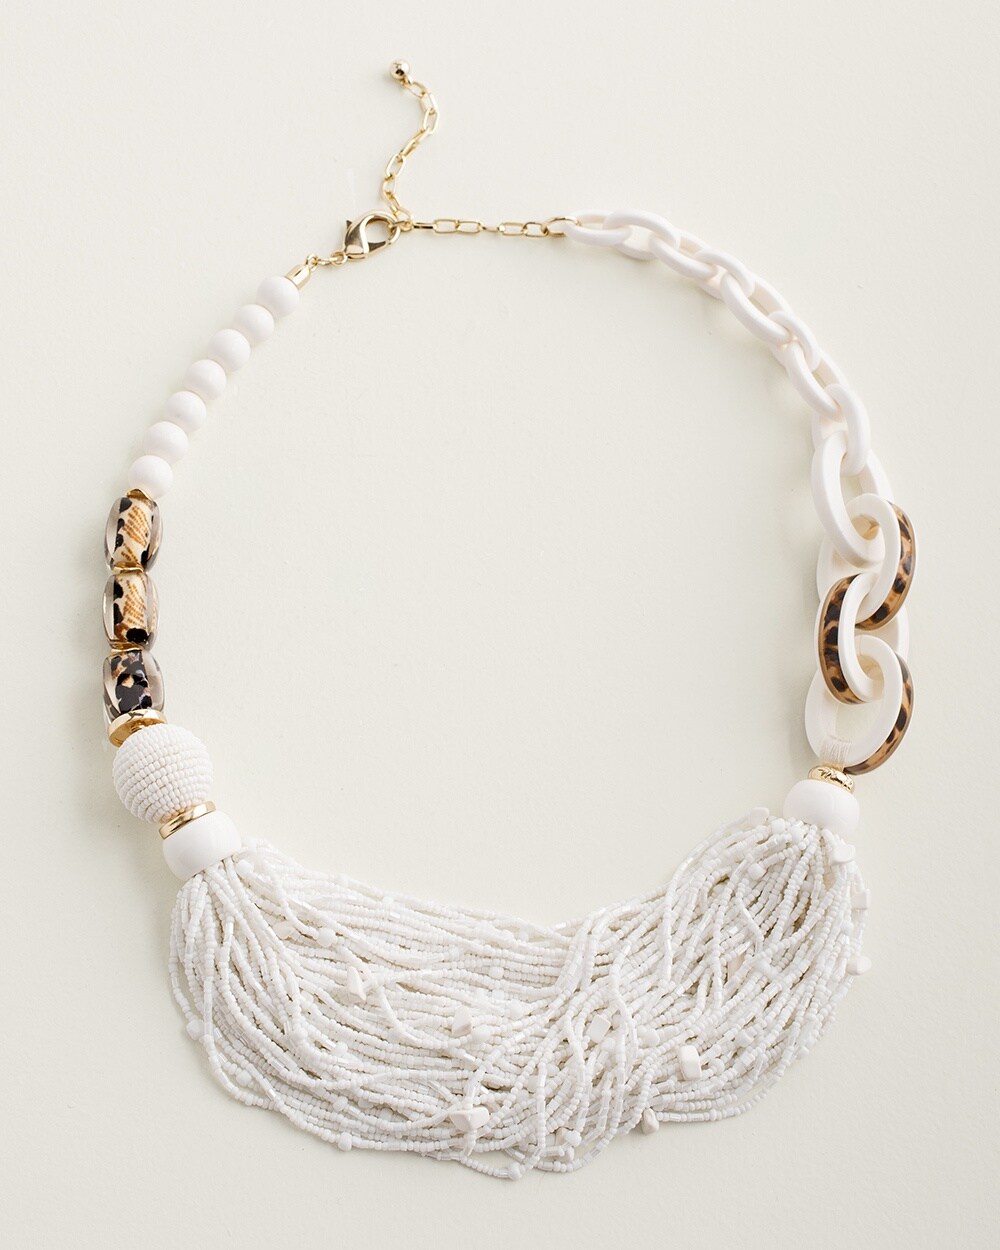 White and Animal-Print Multistrand Necklace